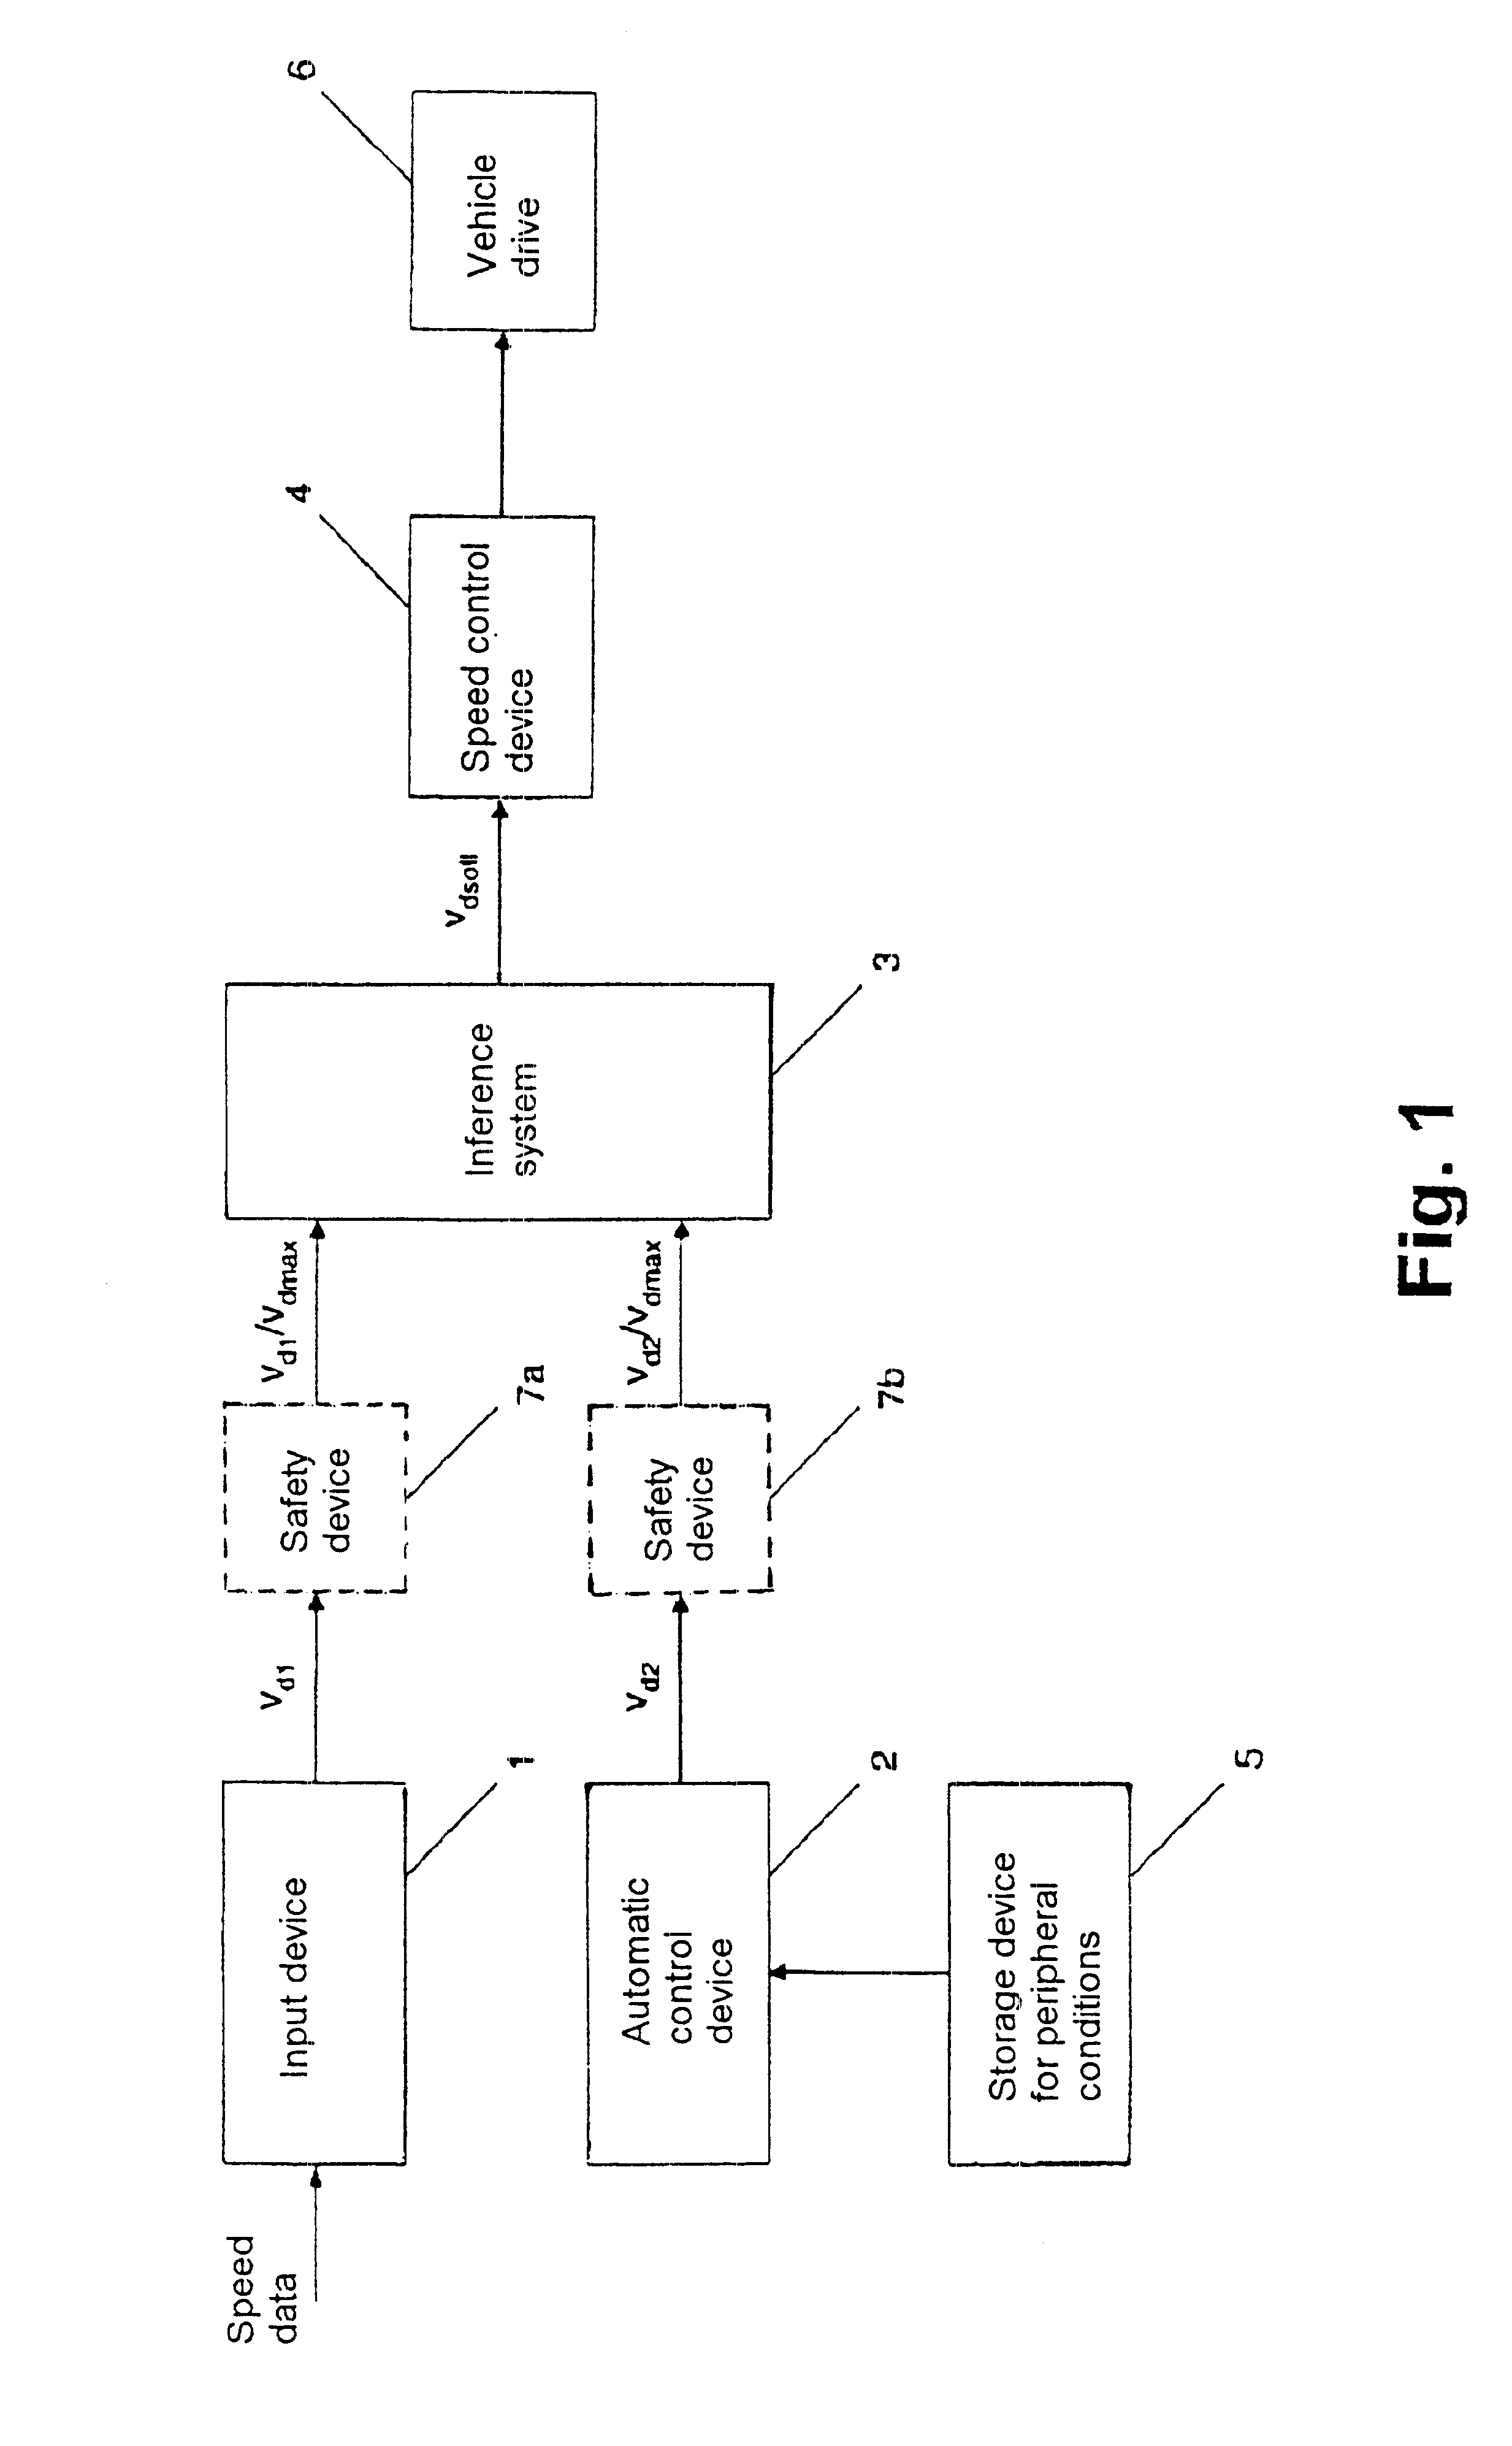 Semiautomatic control system and method for vehicles